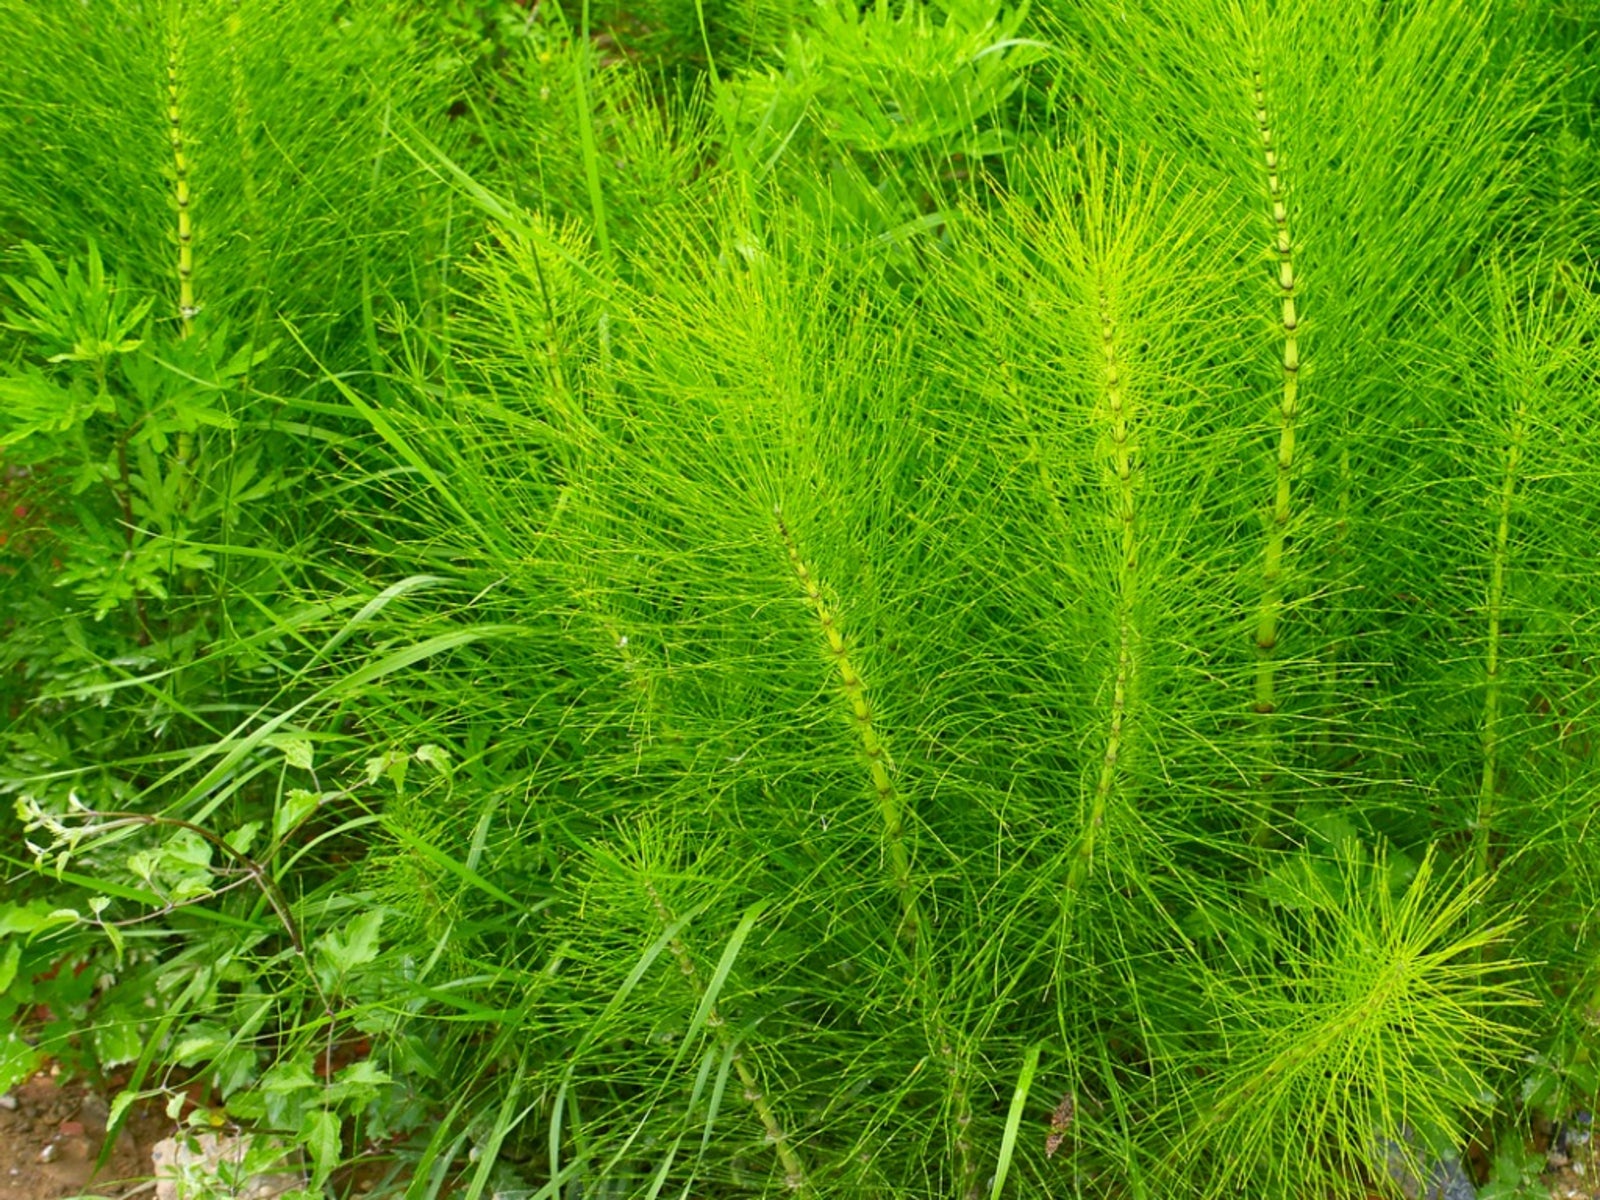 horsetail herb uses - information on caring for horsetail plants